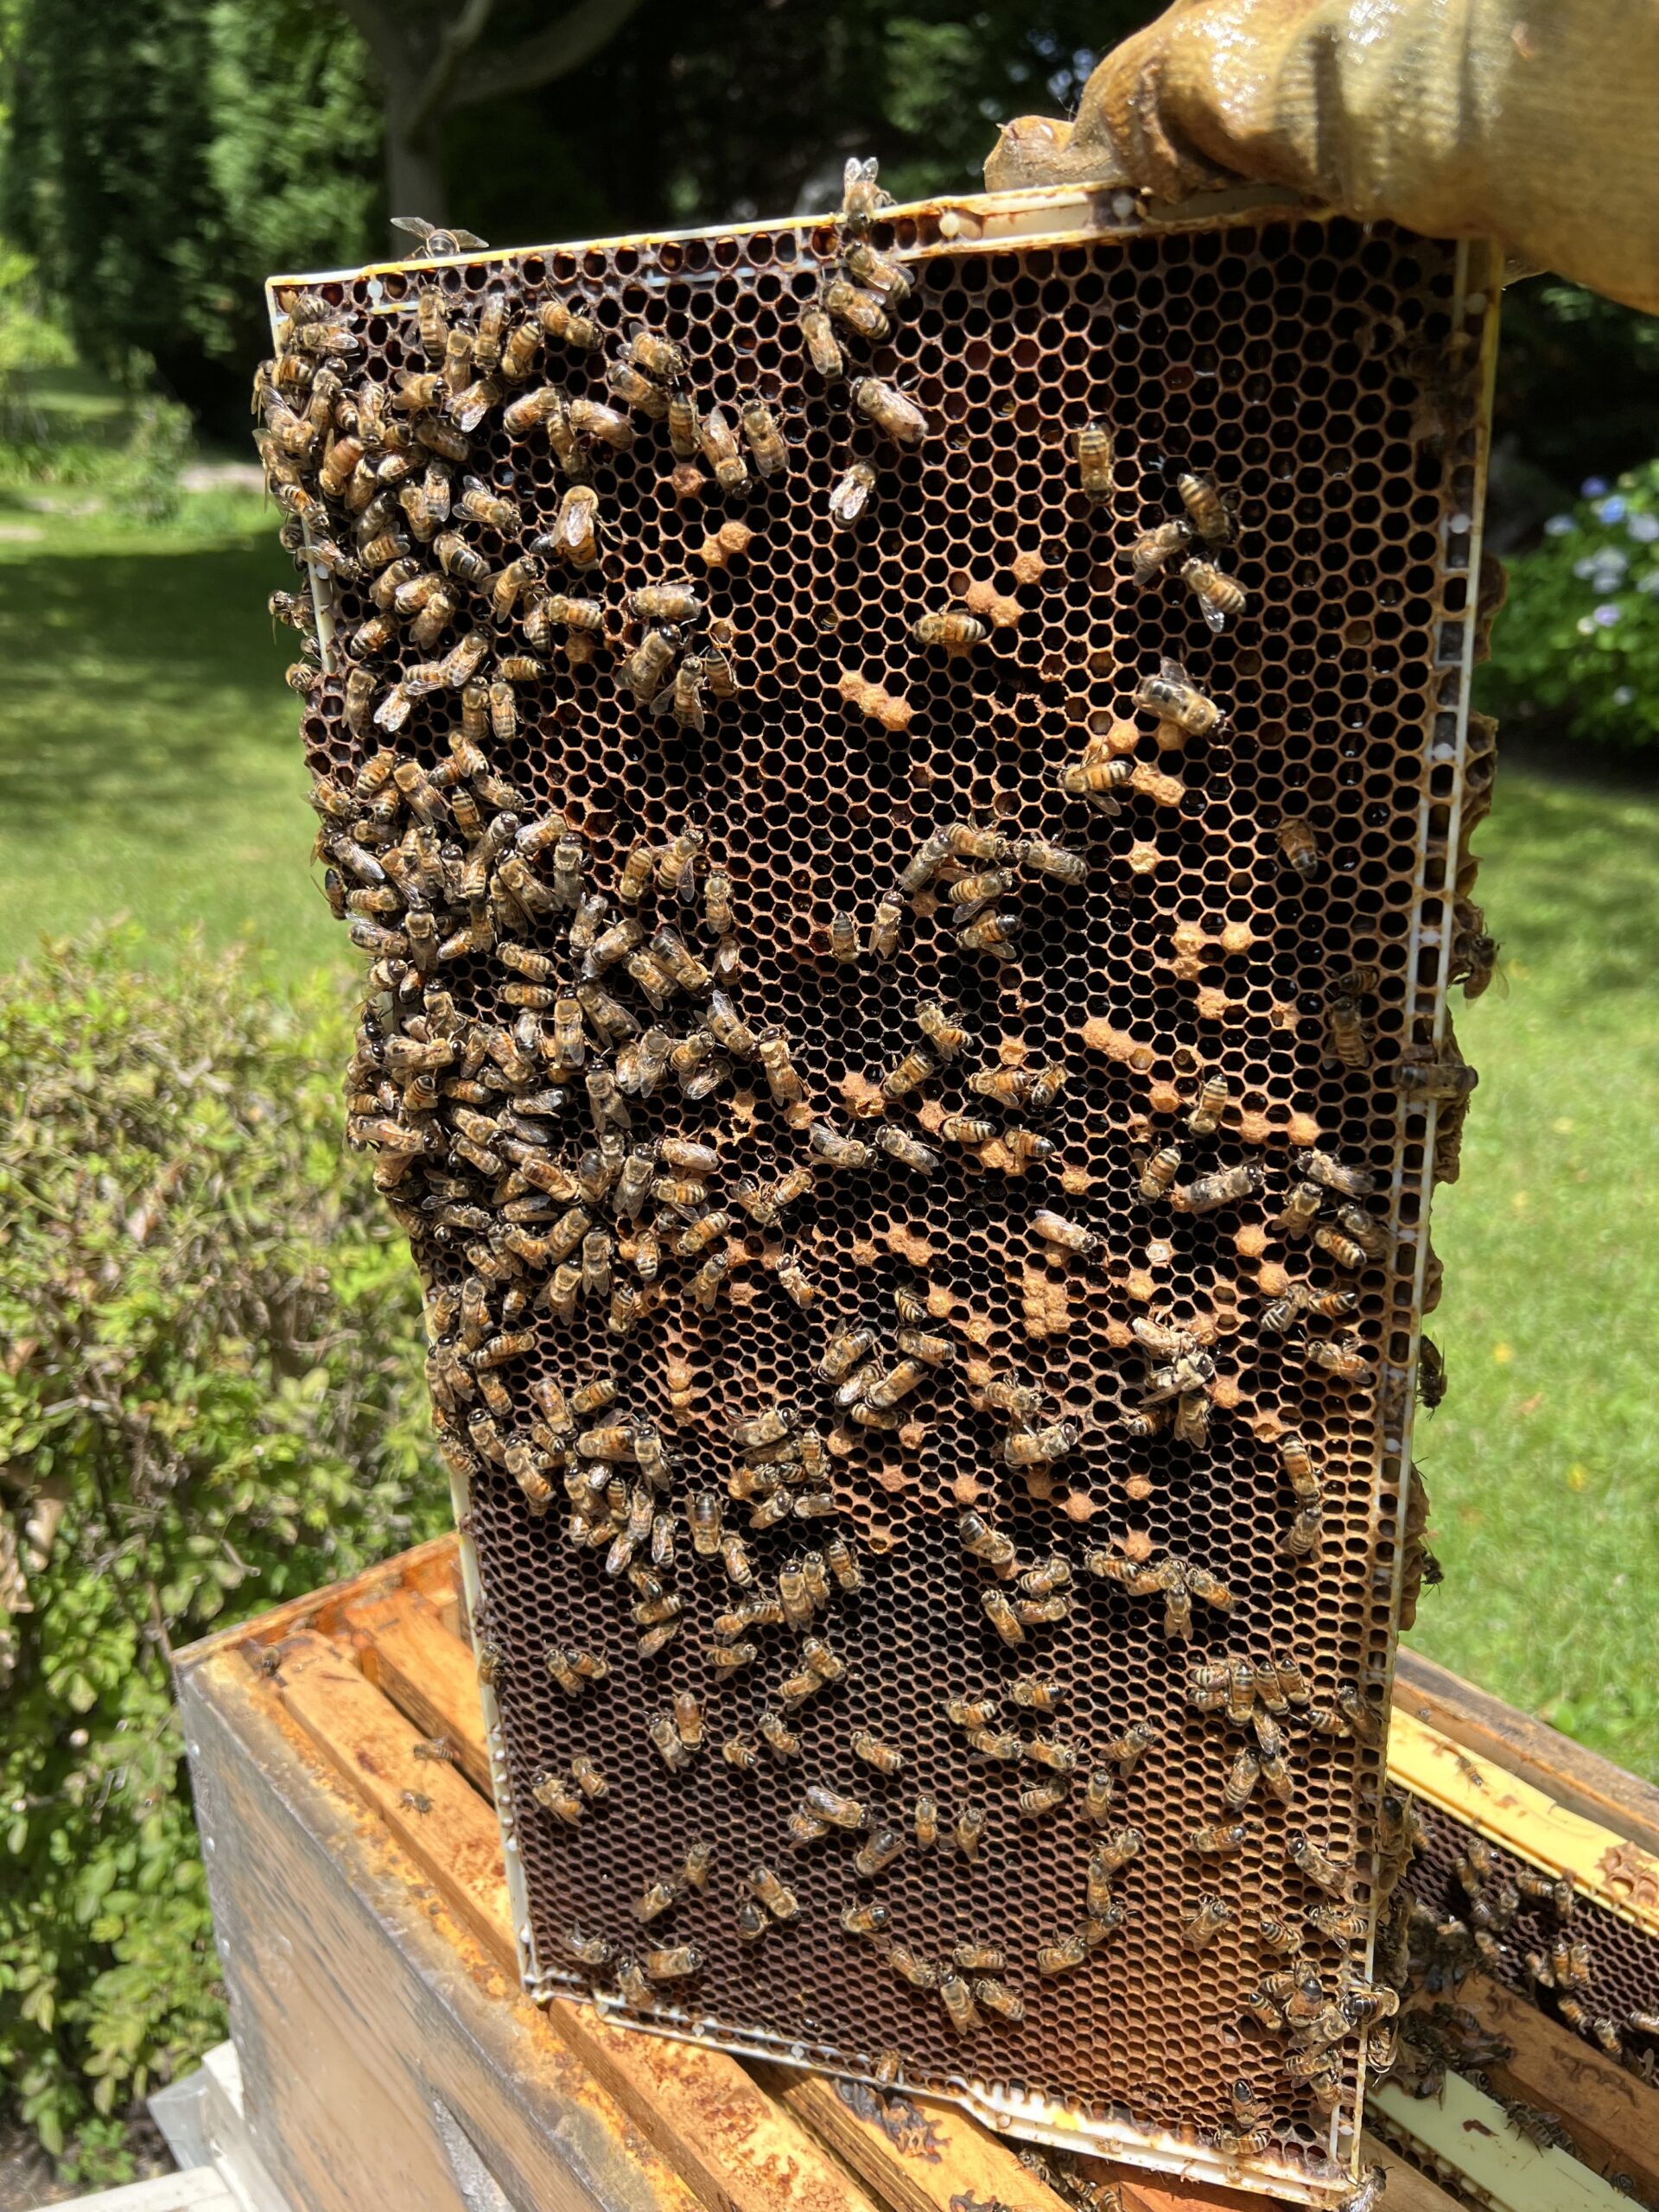 Spotty brood pattern indicates a poorly mated queen. LISA DAFFY